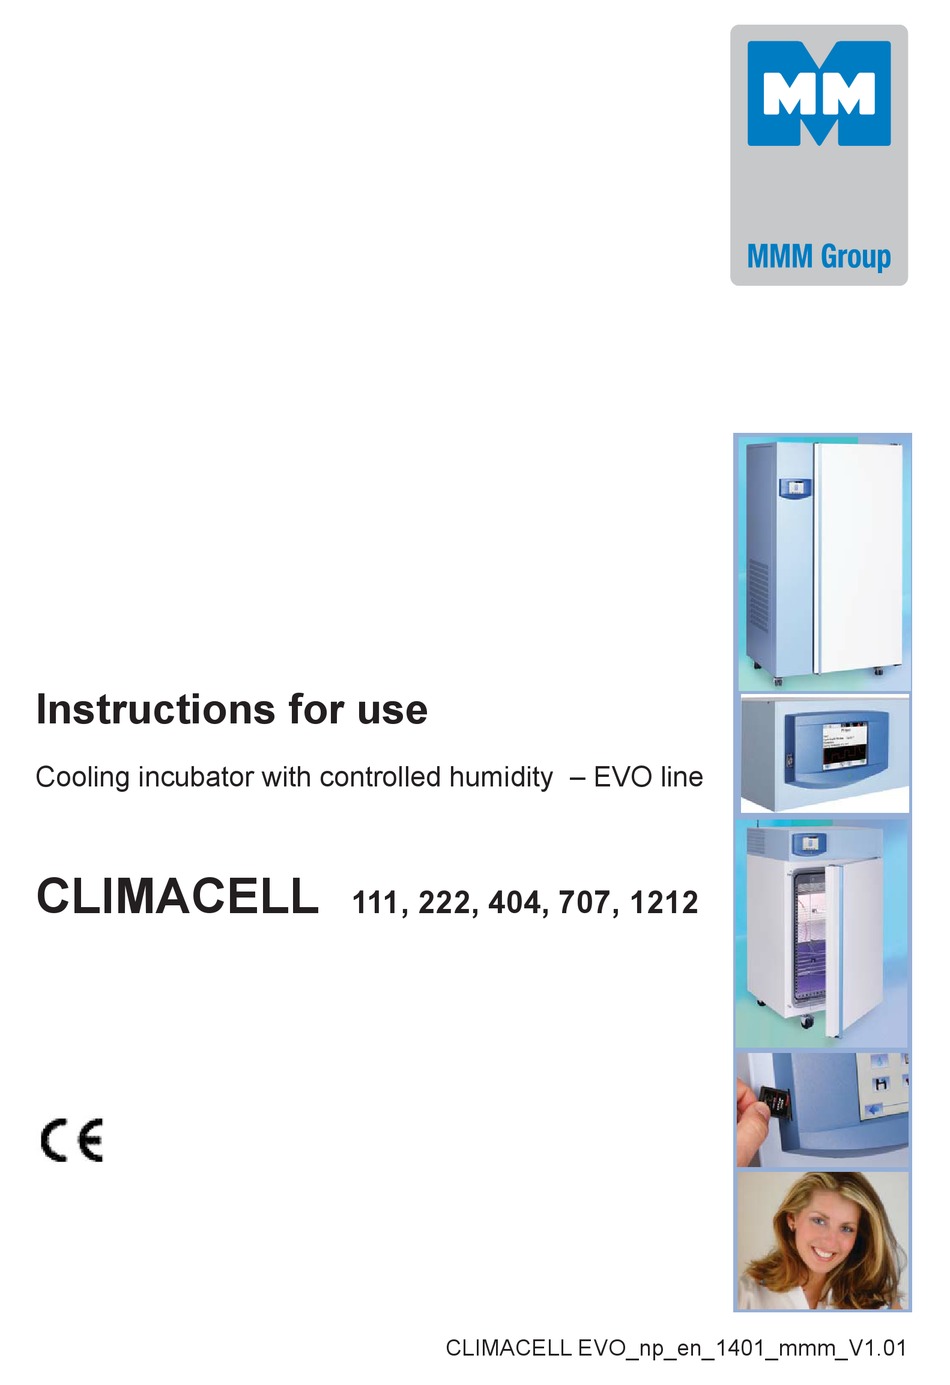 mmm-climacell-111-instructions-for-use-manual-pdf-download-manualslib